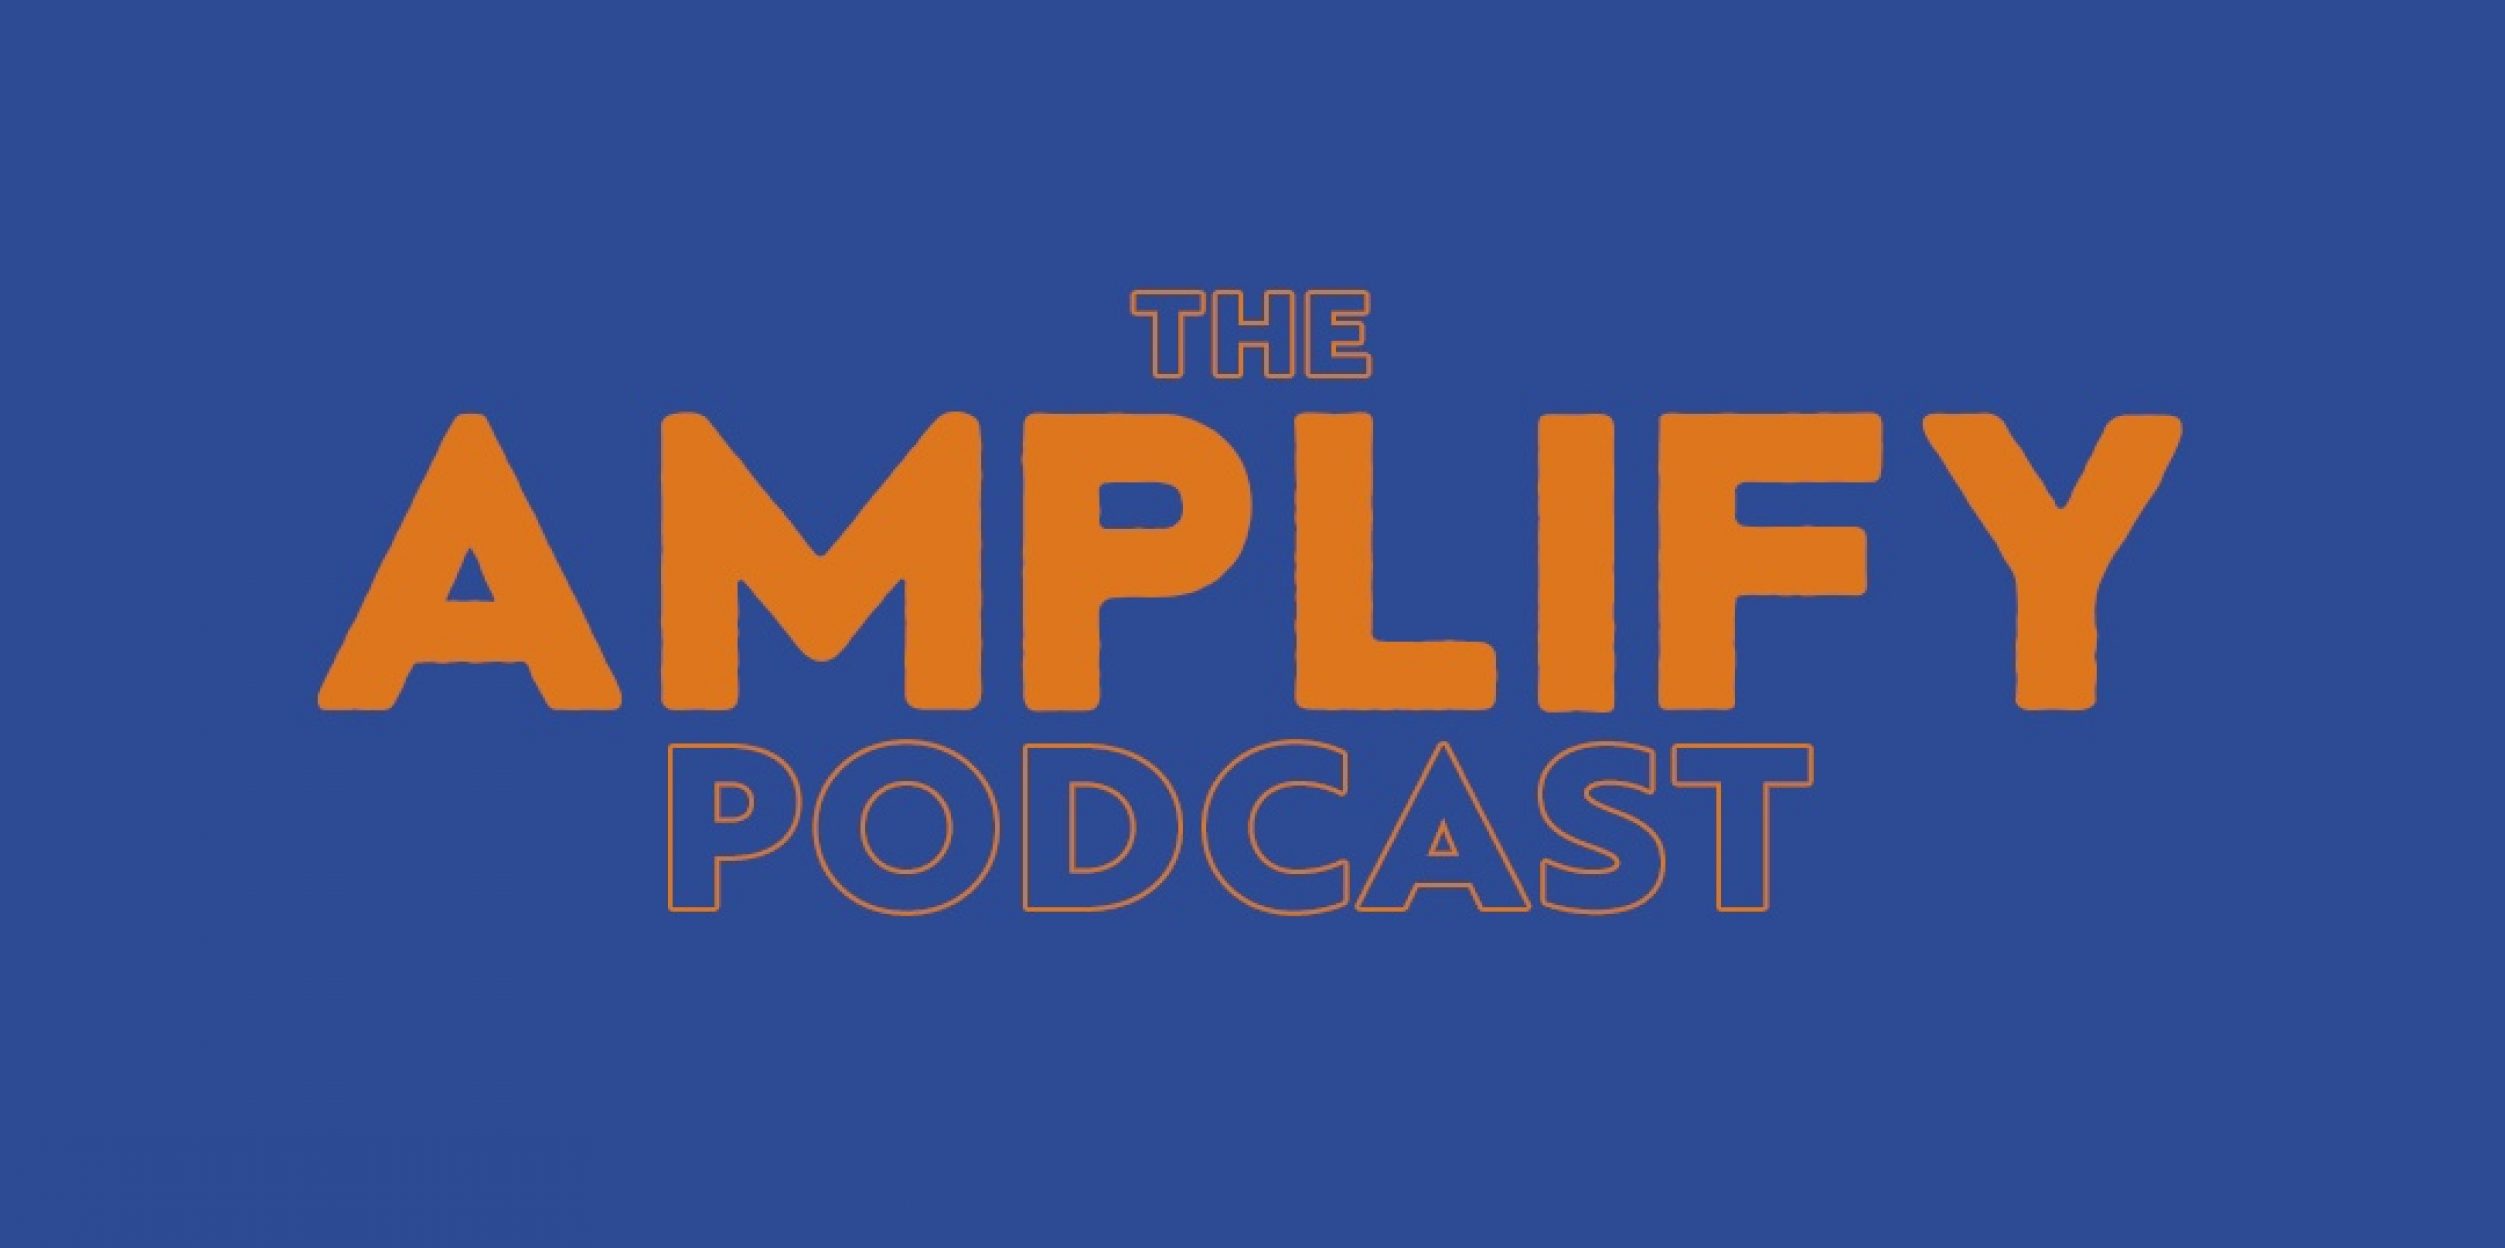 The Amplify Podcast